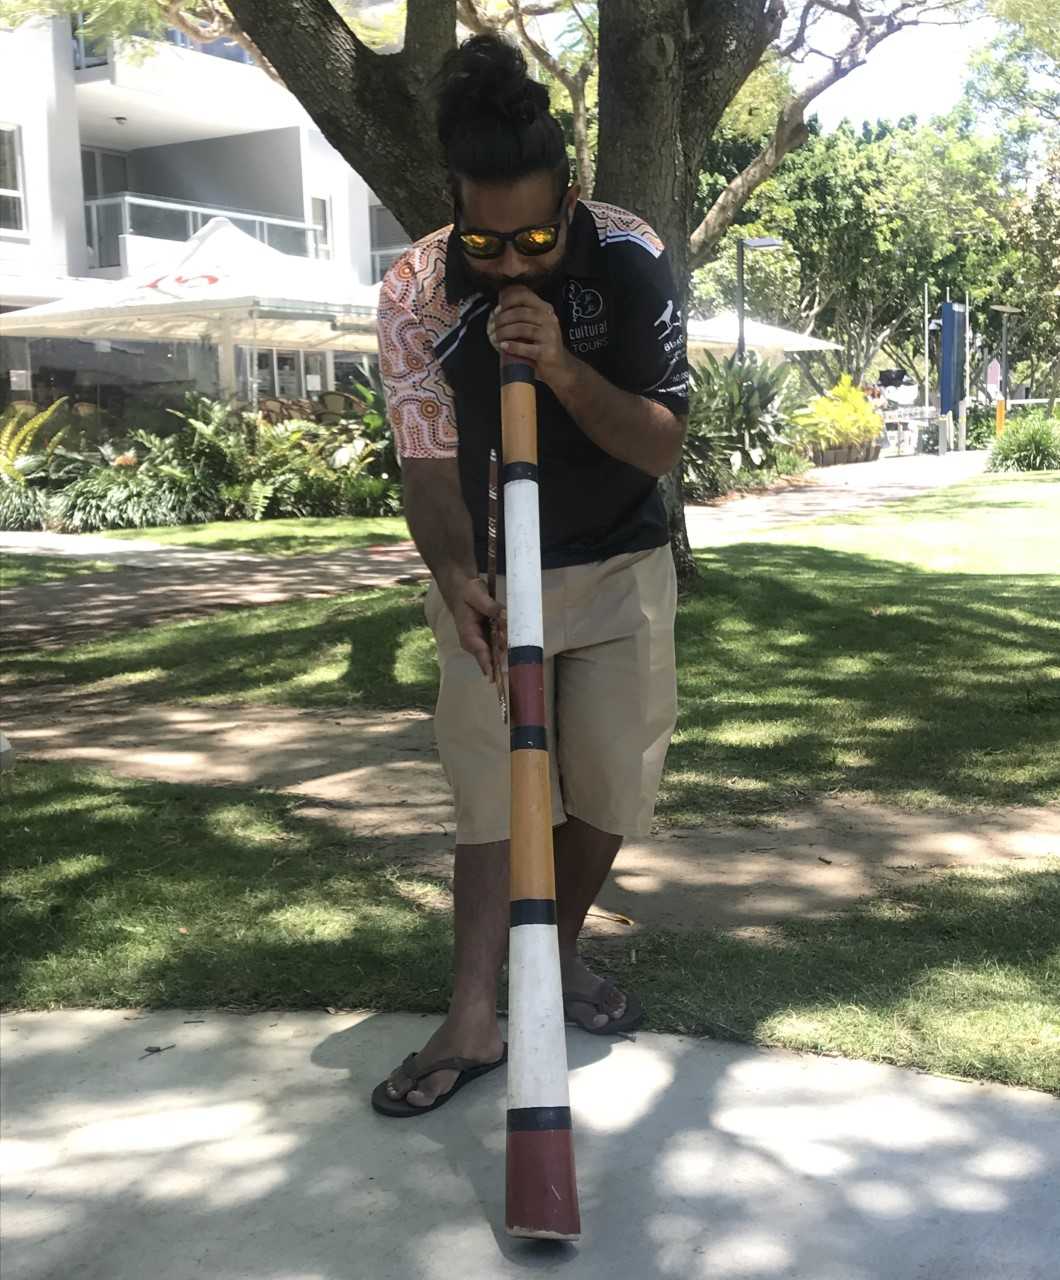 A BlackCard tour guide welcomes the group with a didgeridoo performance